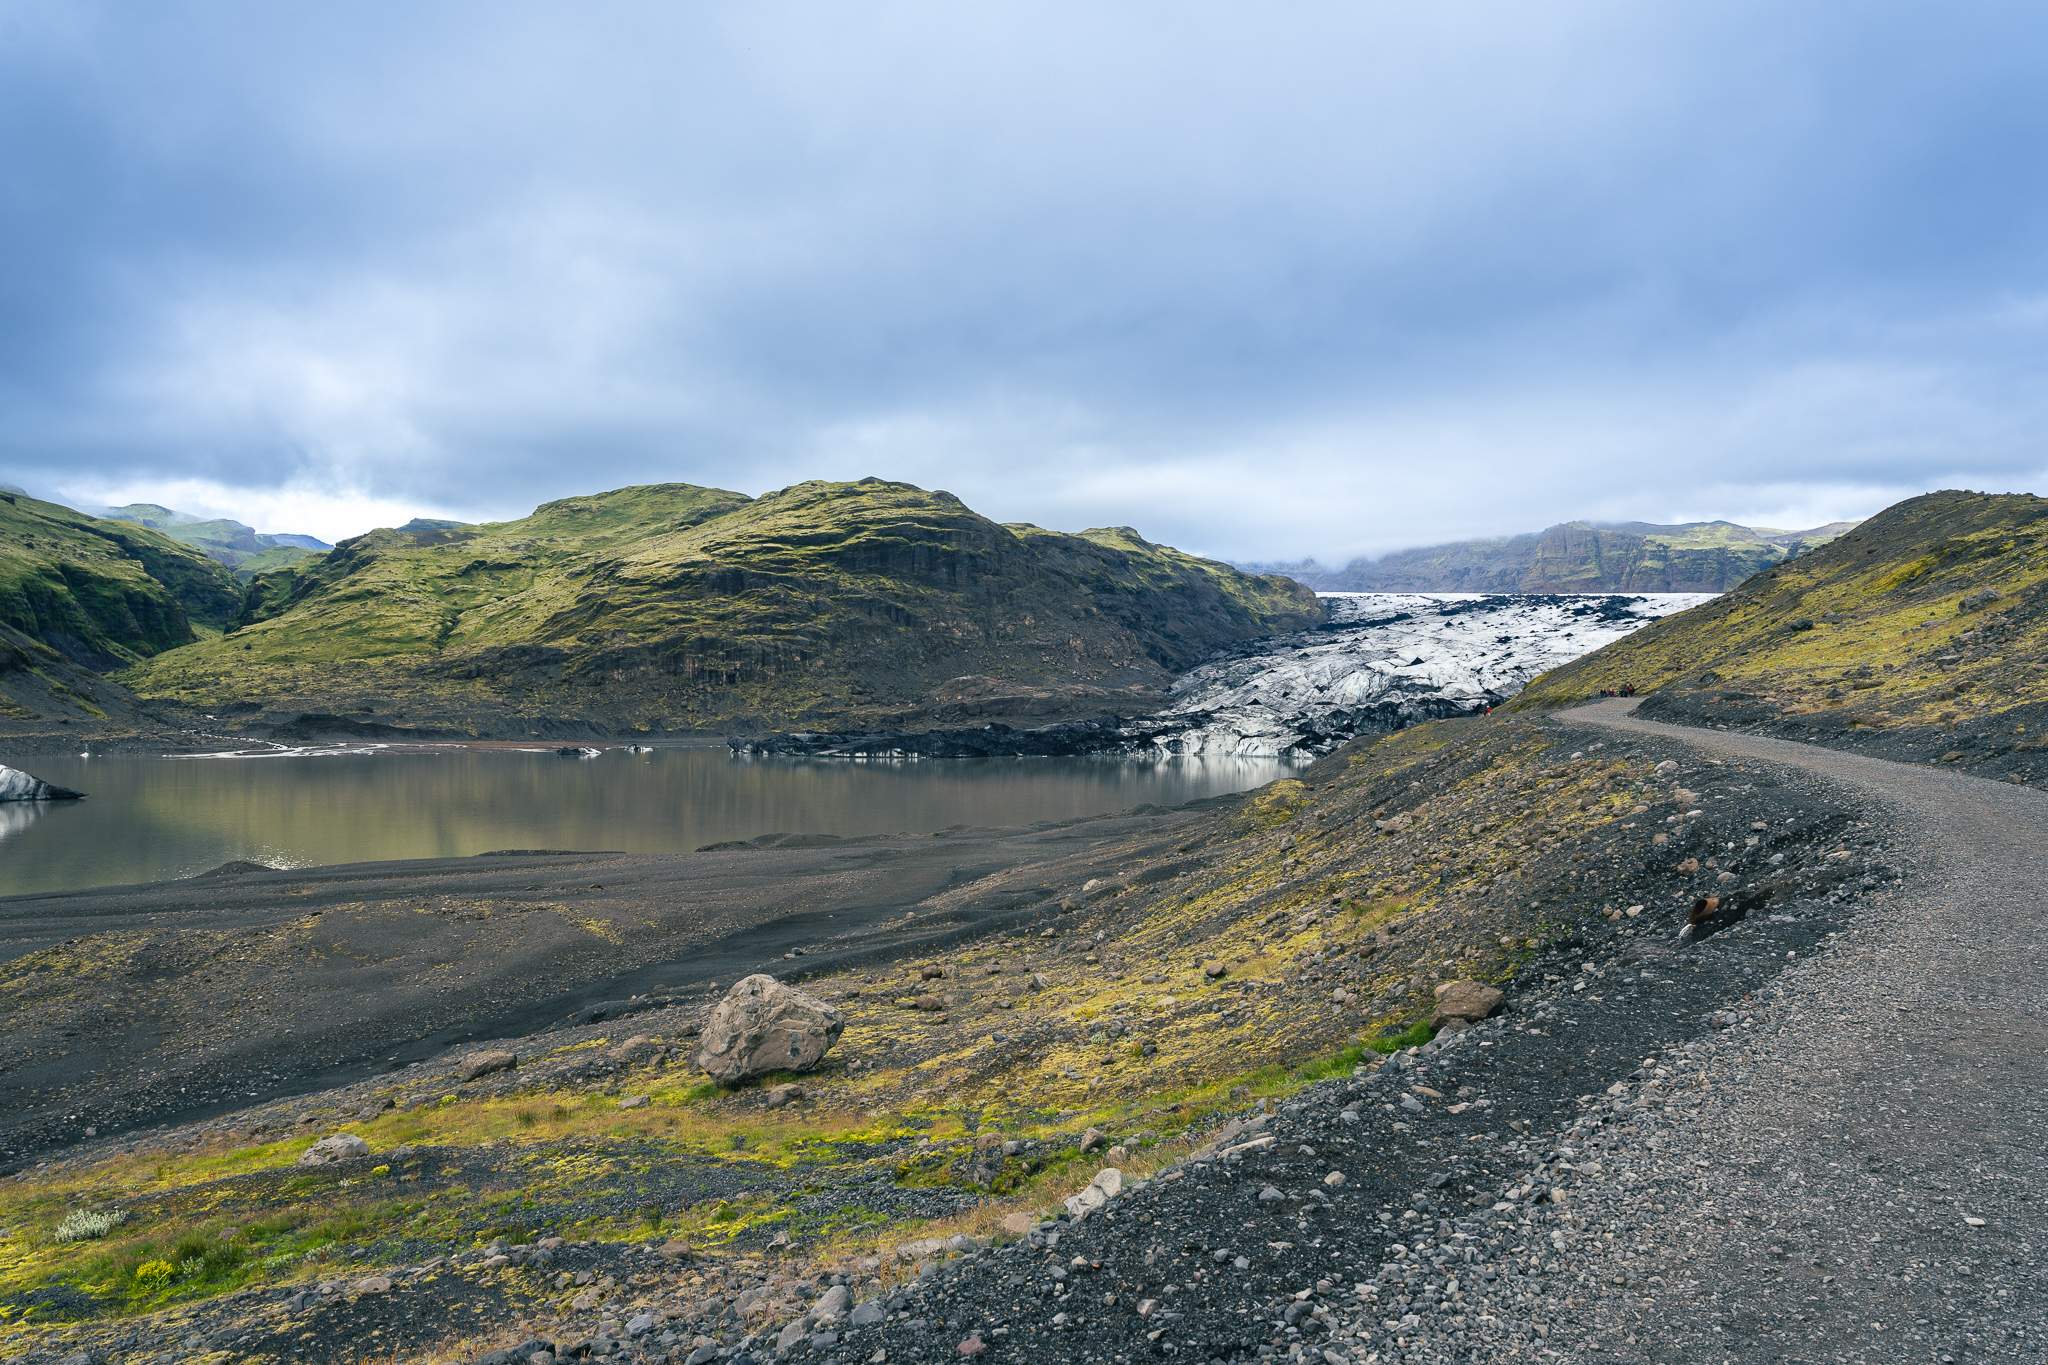 Sólheimajökull glacier seen from approaching road, Icleand